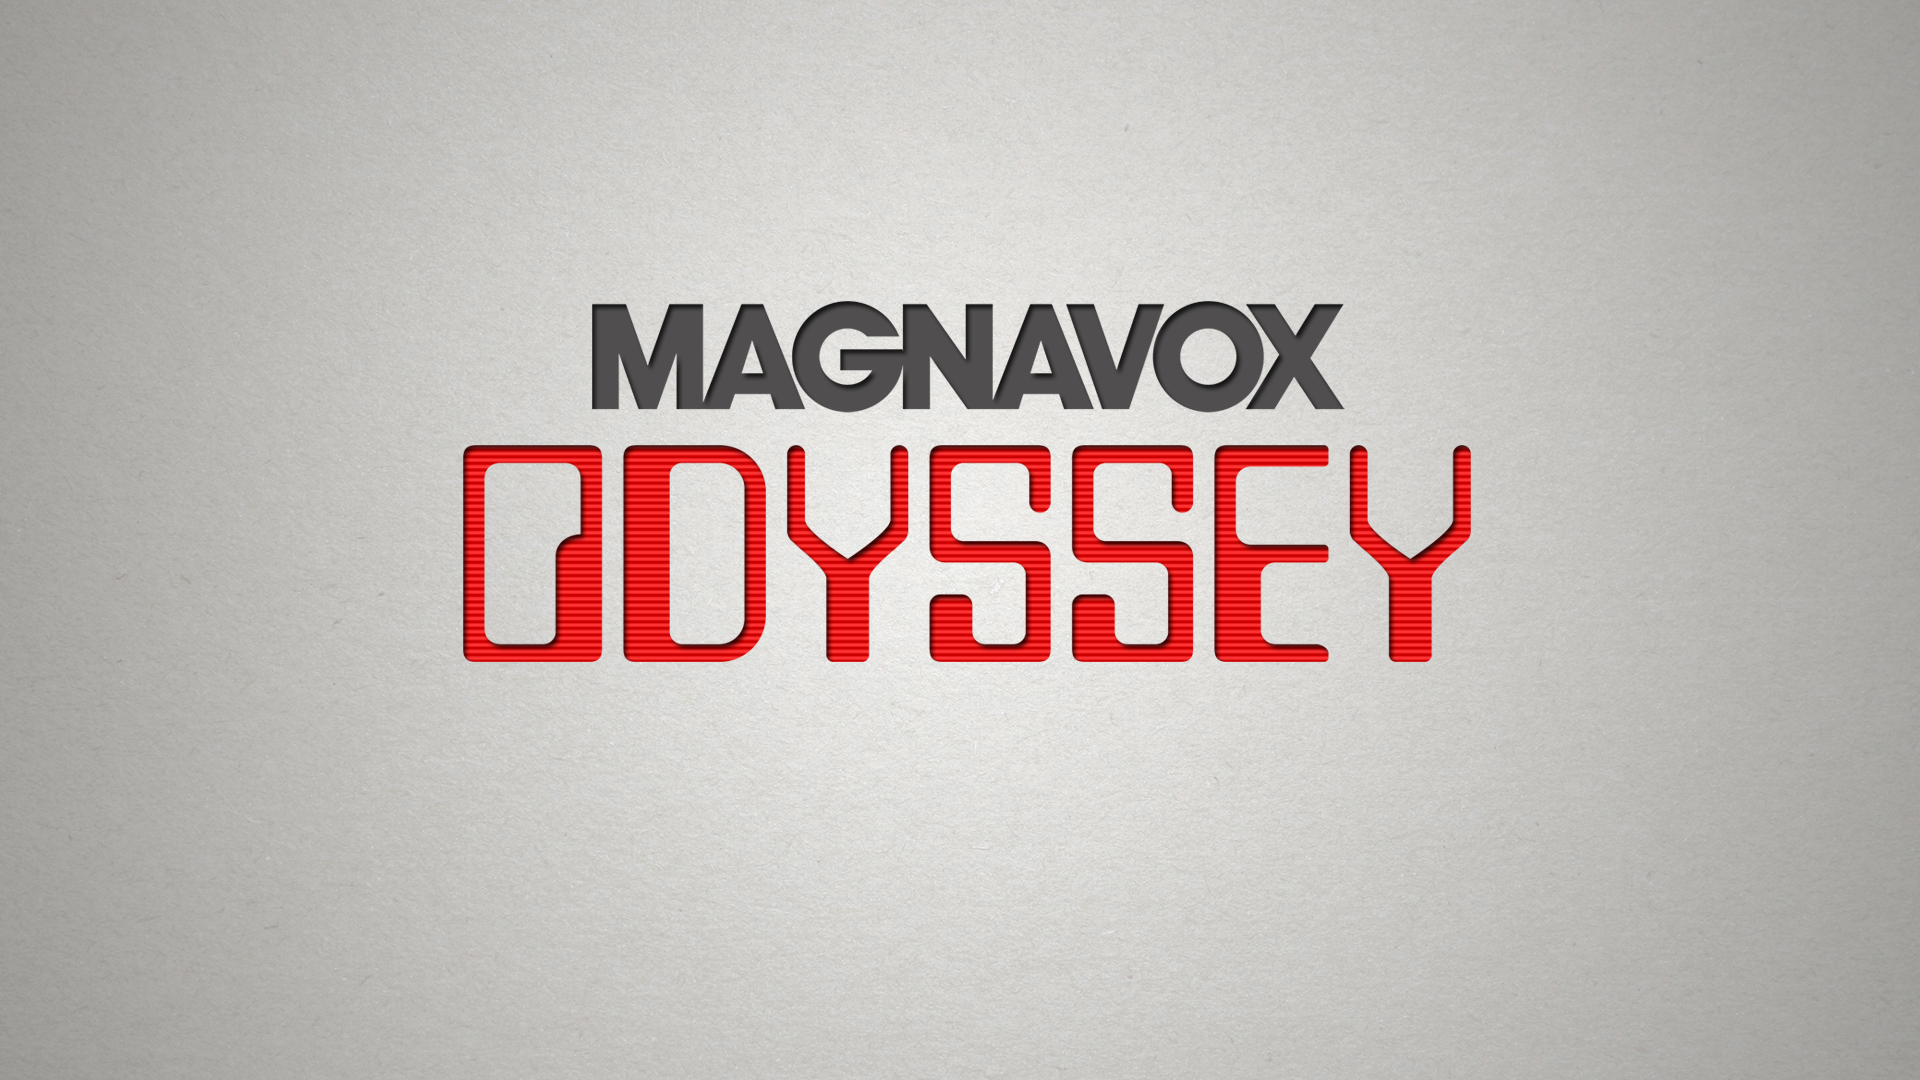 2 Magnavox Odyssey HD Wallpapers | Background Images - Wallpaper Abyss